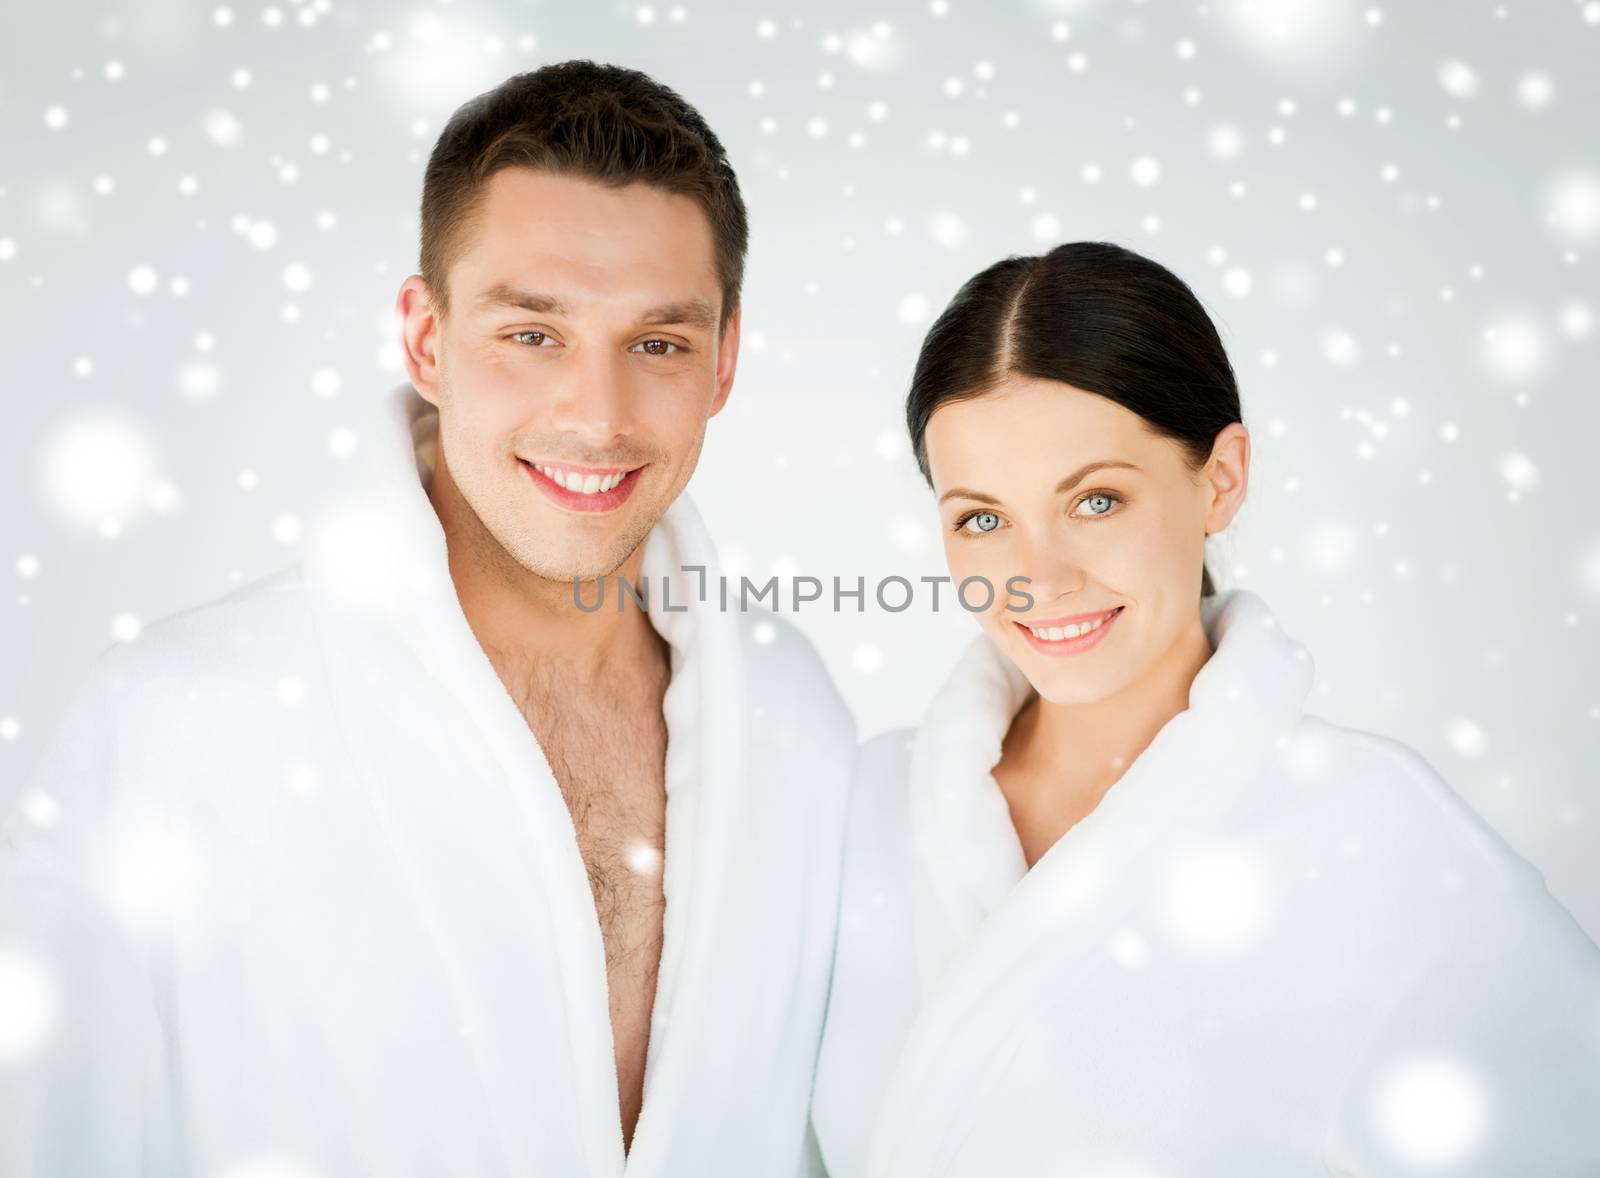 health and beauty concept - couple in spa salon in white bathrobes